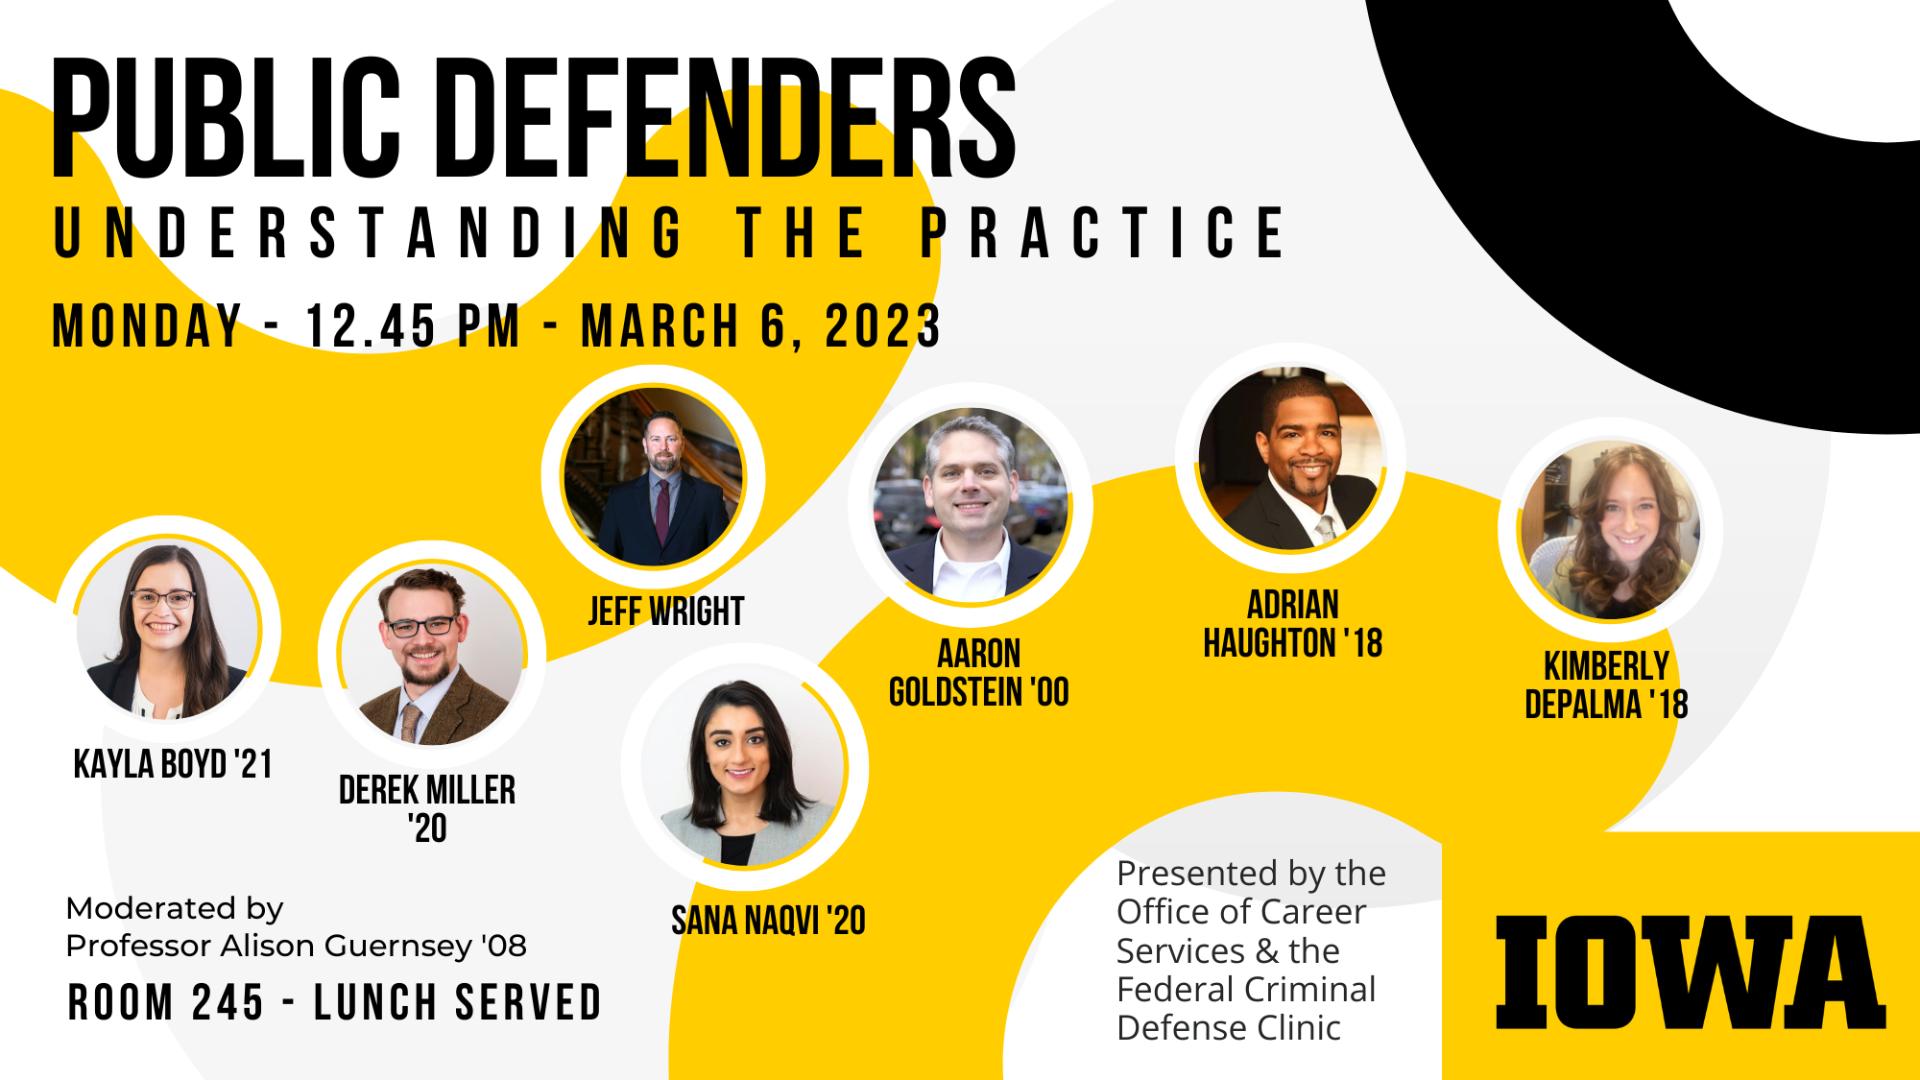 Public Defenders    Understanding the Practice    Monday - 12:45 pm - March 6, 2023        Kayla Boyd '21    Derek Miller '20    Jeff Wright    Sana Naqvi '20    Aaron Goldstein '00    Adrian Haughton "18    Kimberly DePalma '18    Moderated by Professor Alison Guernsey '08    Room 245 - Lunch Served        Presented by the Office of Career Services & the Federal Criminal Defense Clinic        Iowa logo